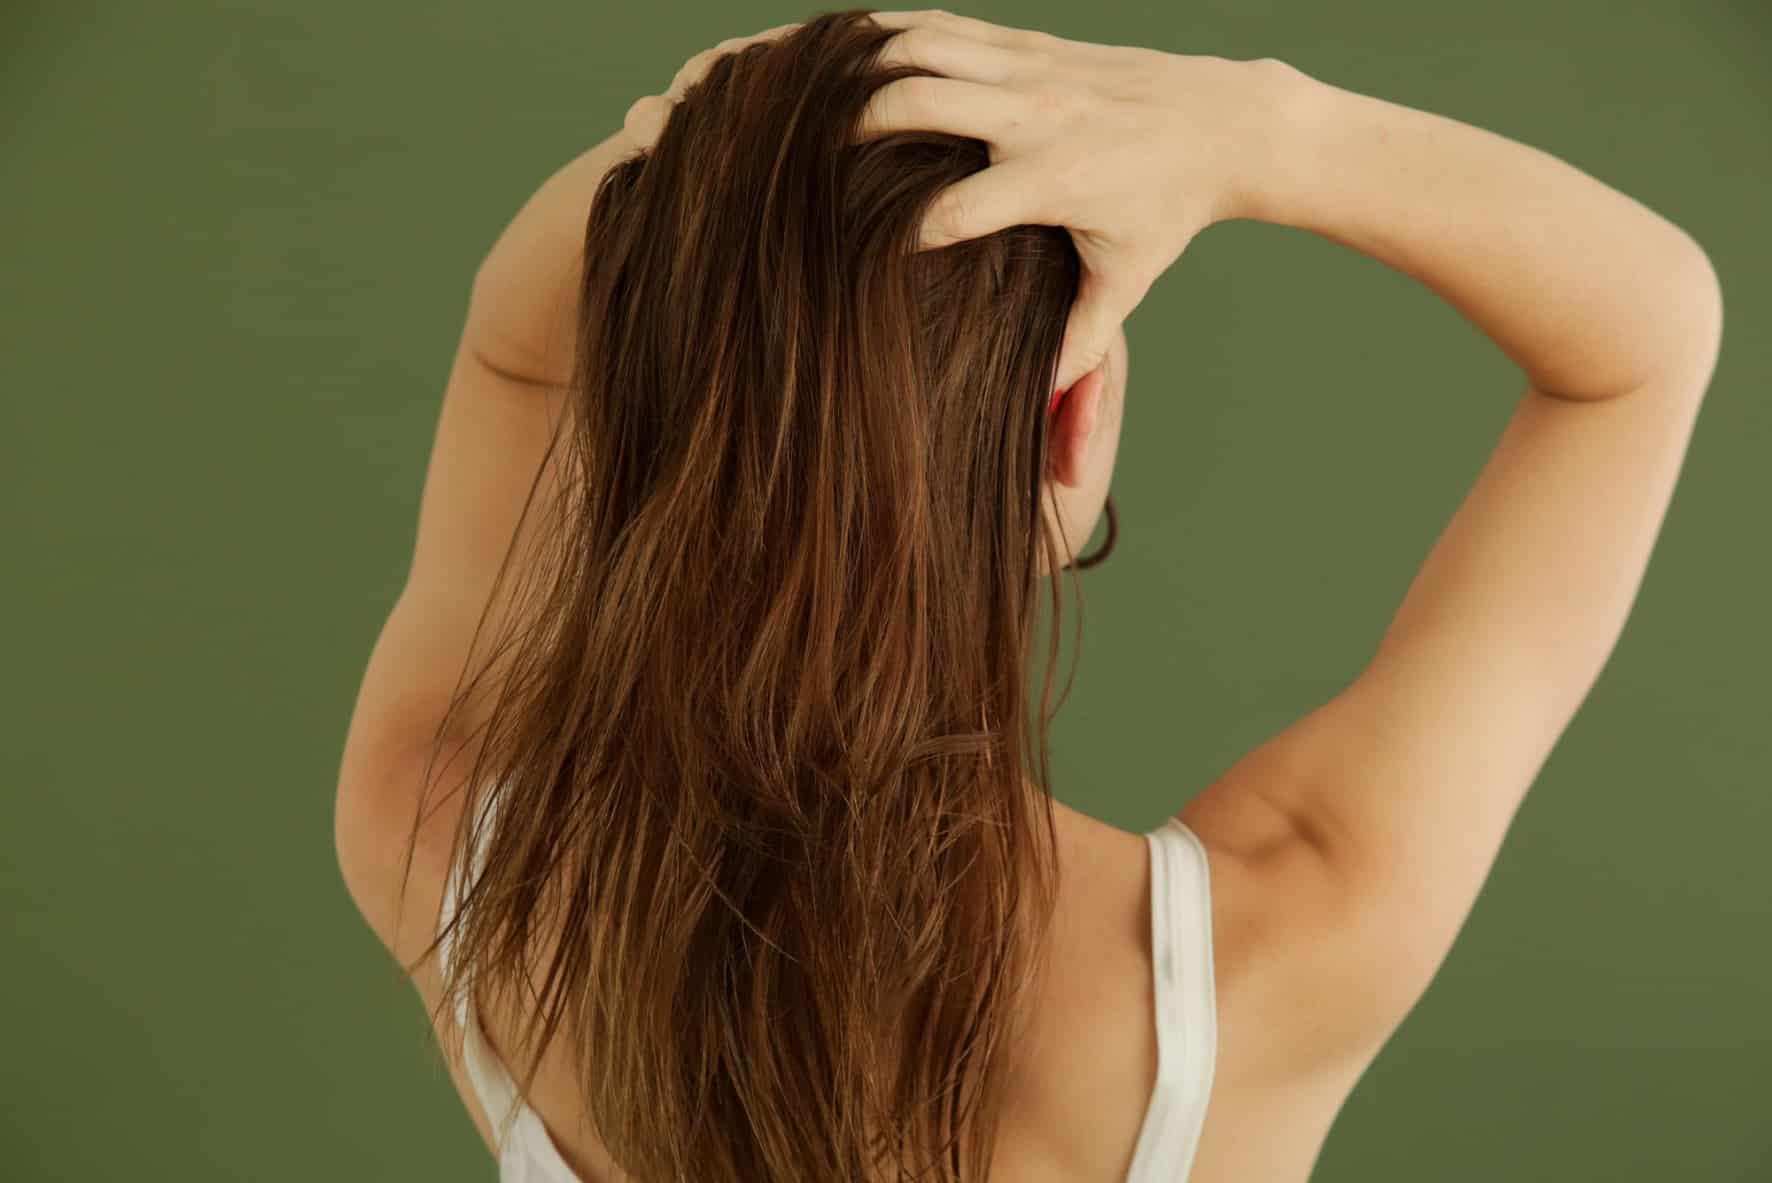 How to Care for Hair Loss With Herbal Hair Tonic